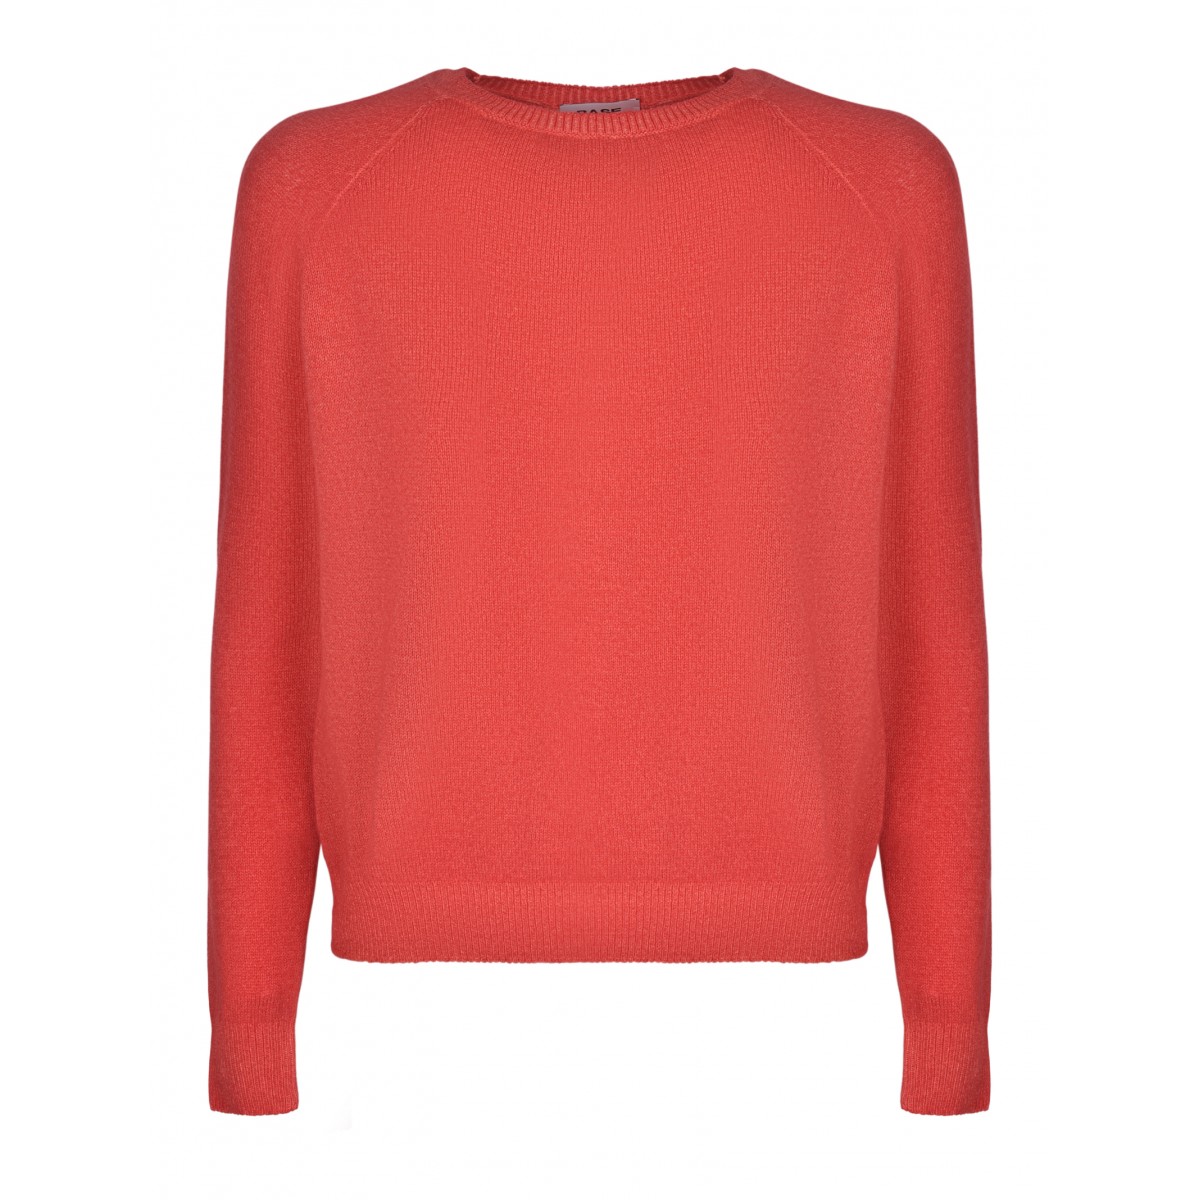 Coral Wool and Cashmere Sweater